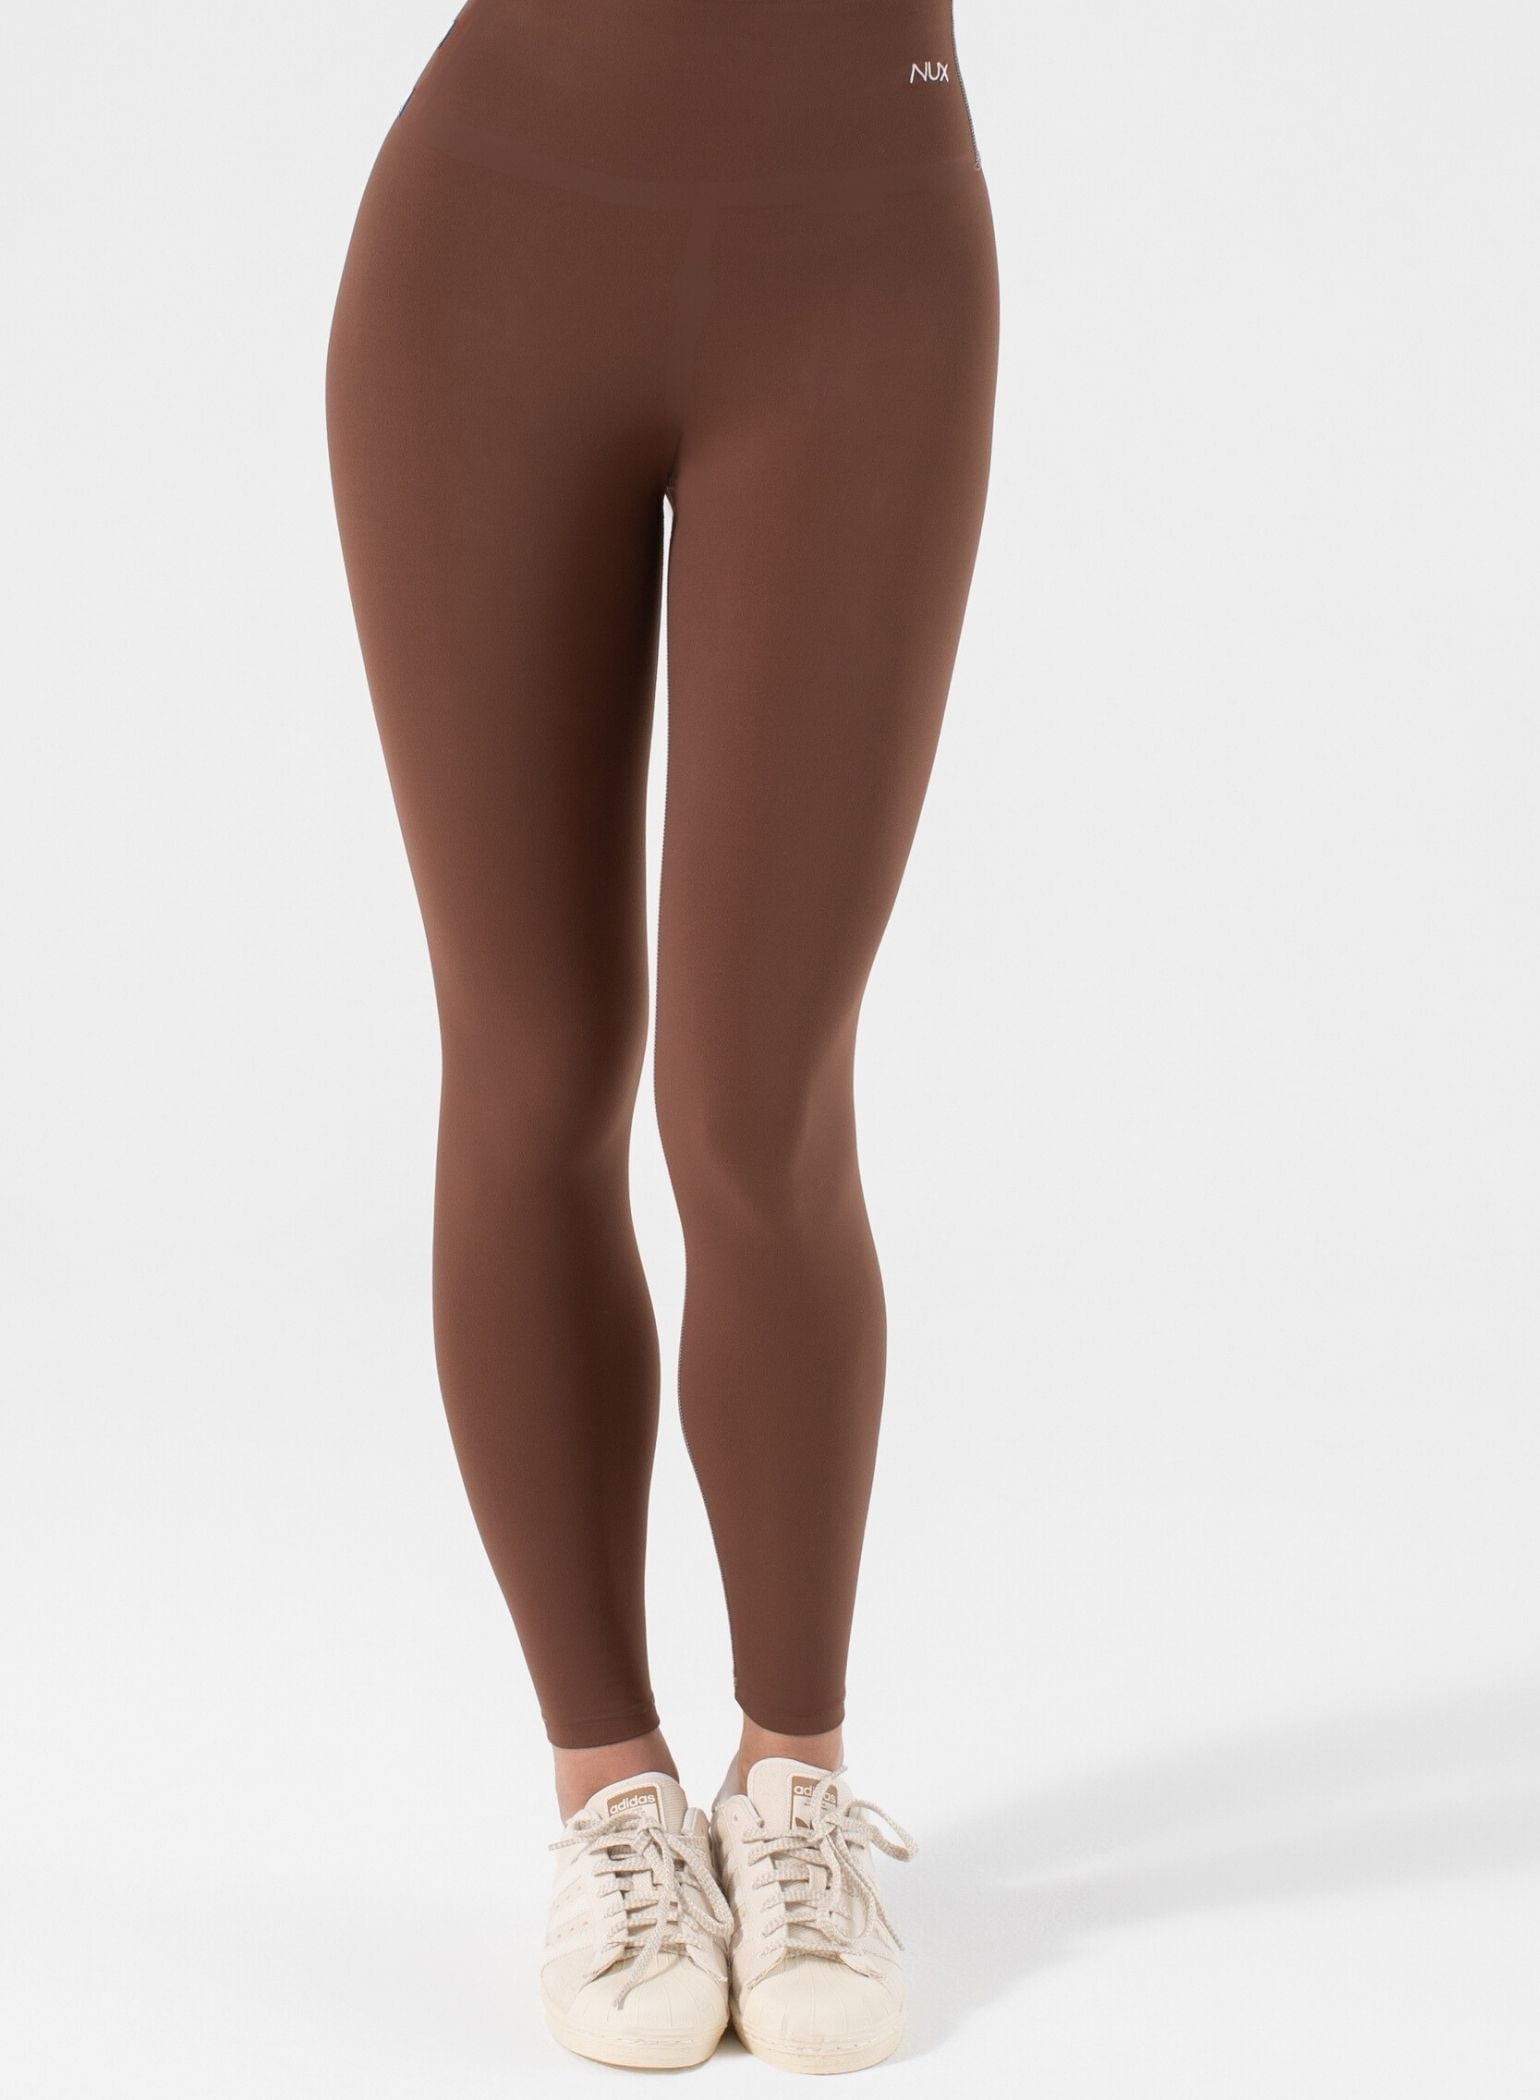 Willow & Clay Colored Leggings, $50, Off 5th